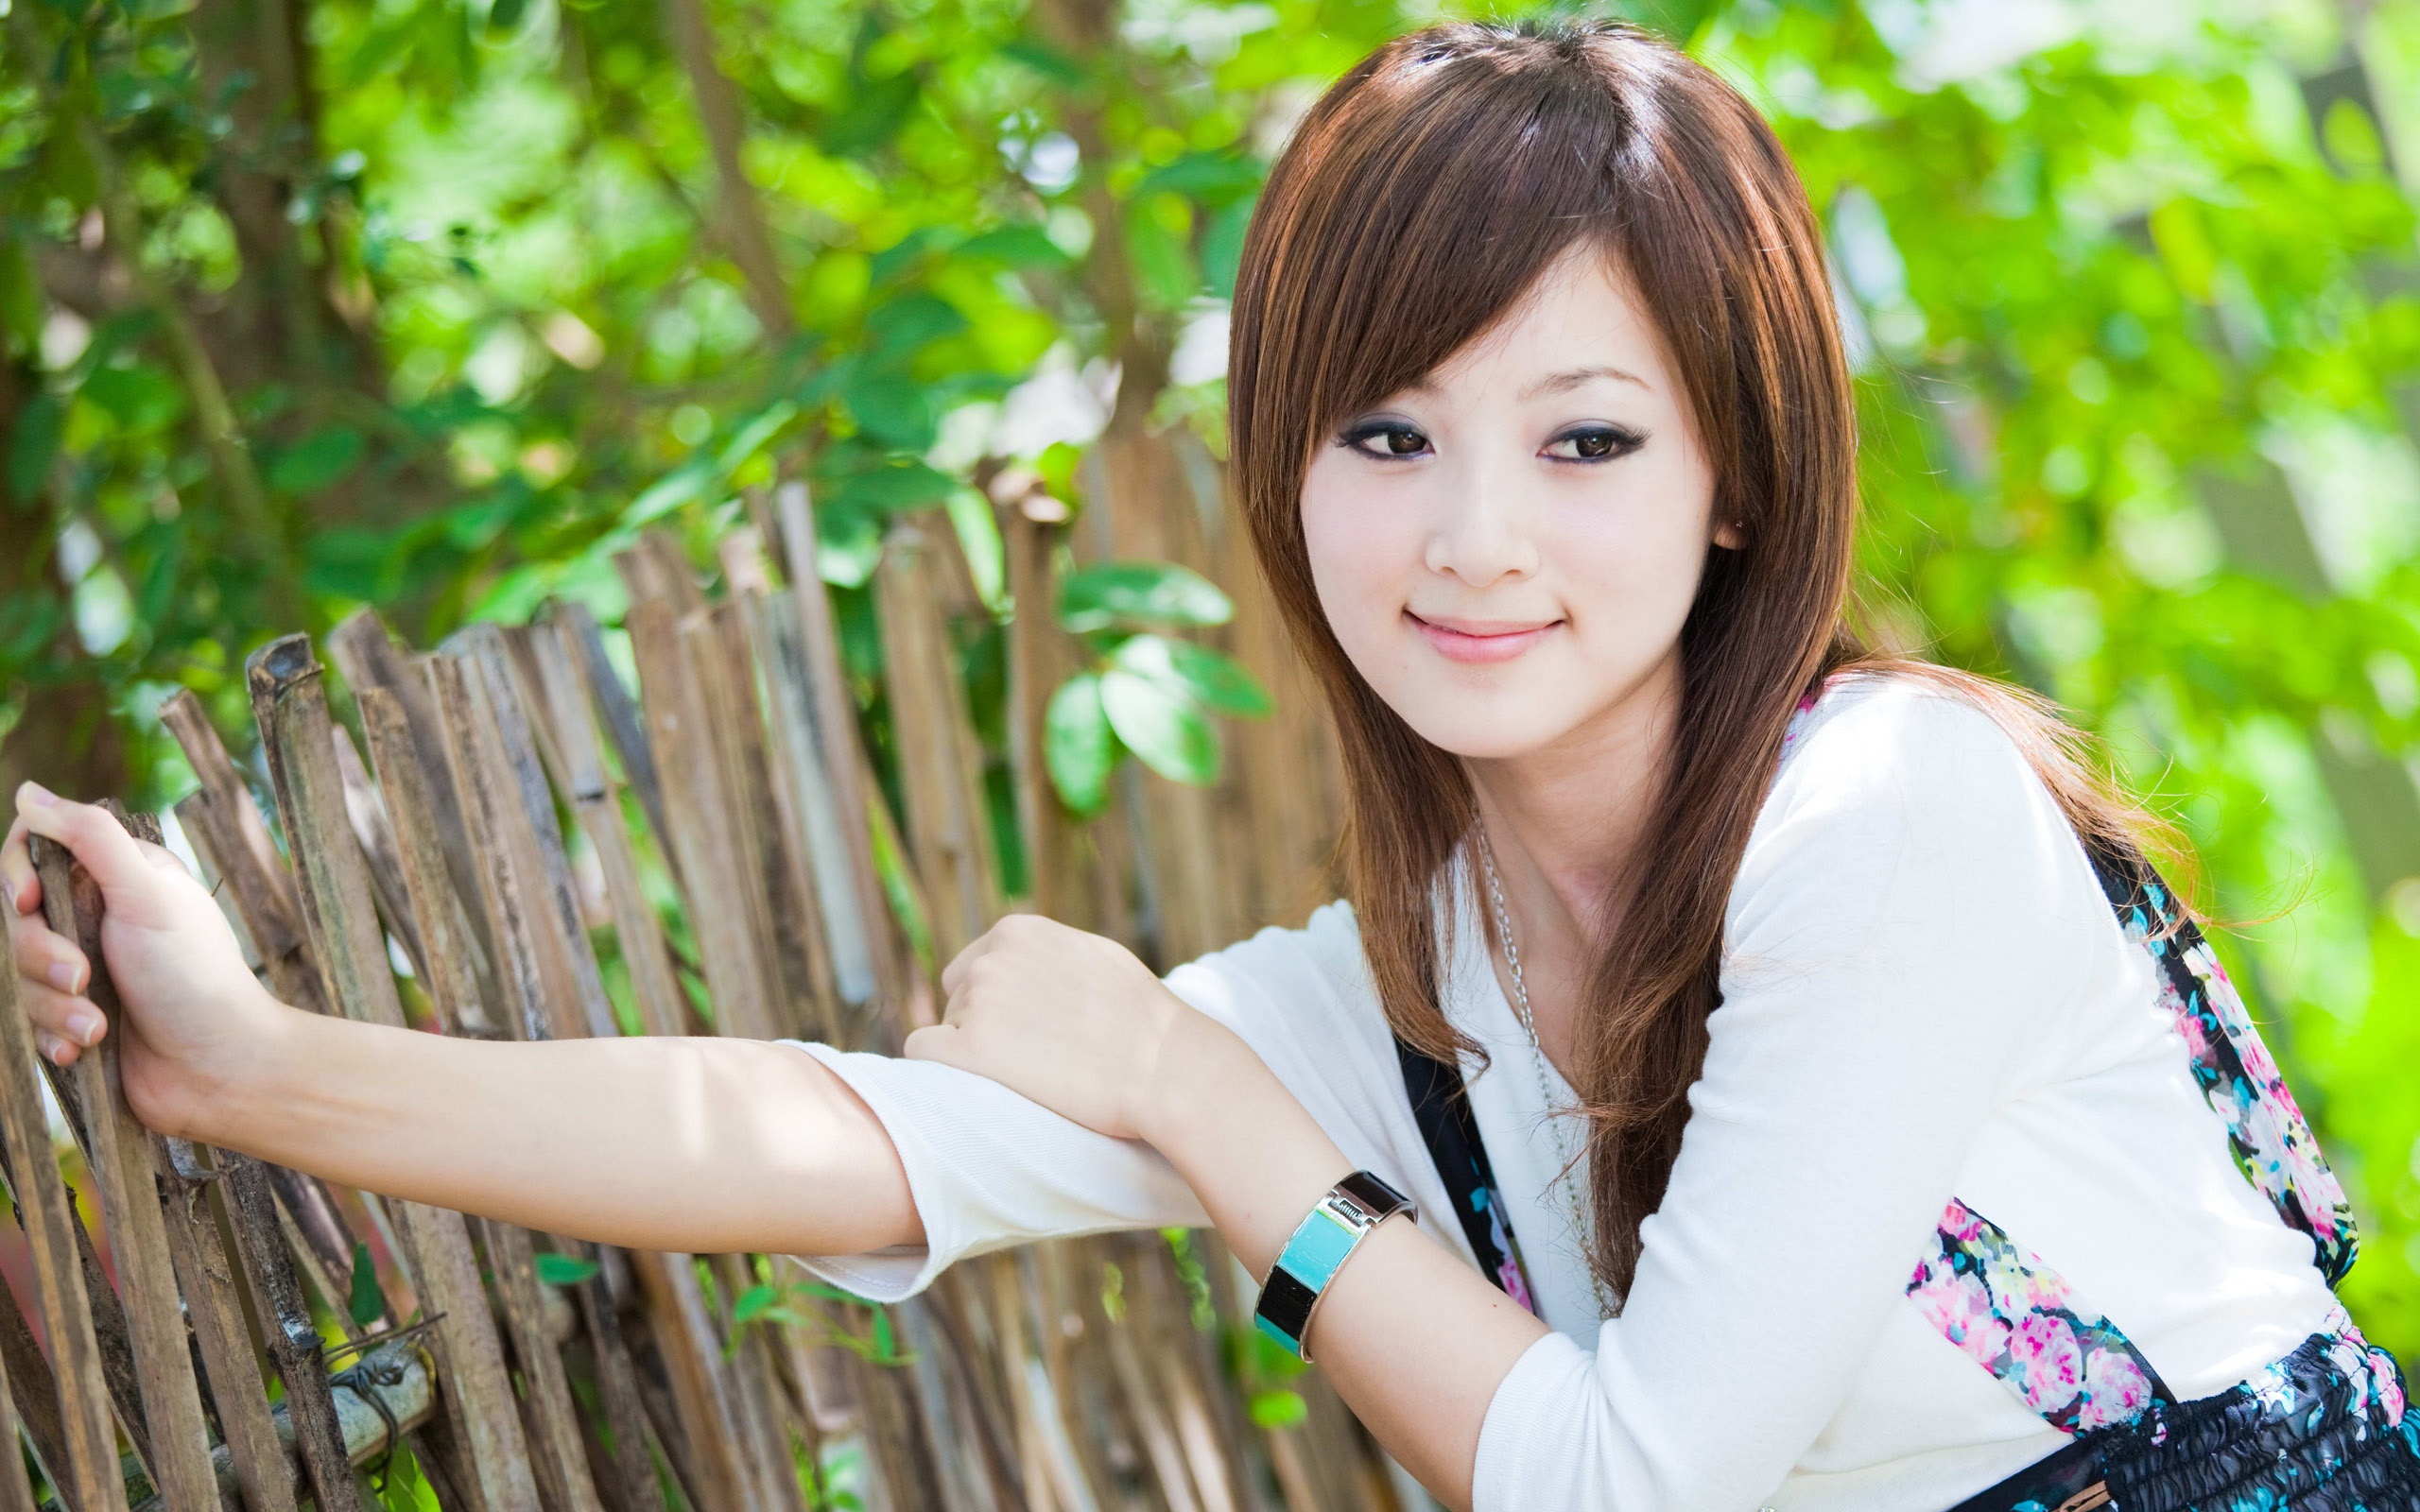 About Korean Girls And To High Definition HD Wallpaper